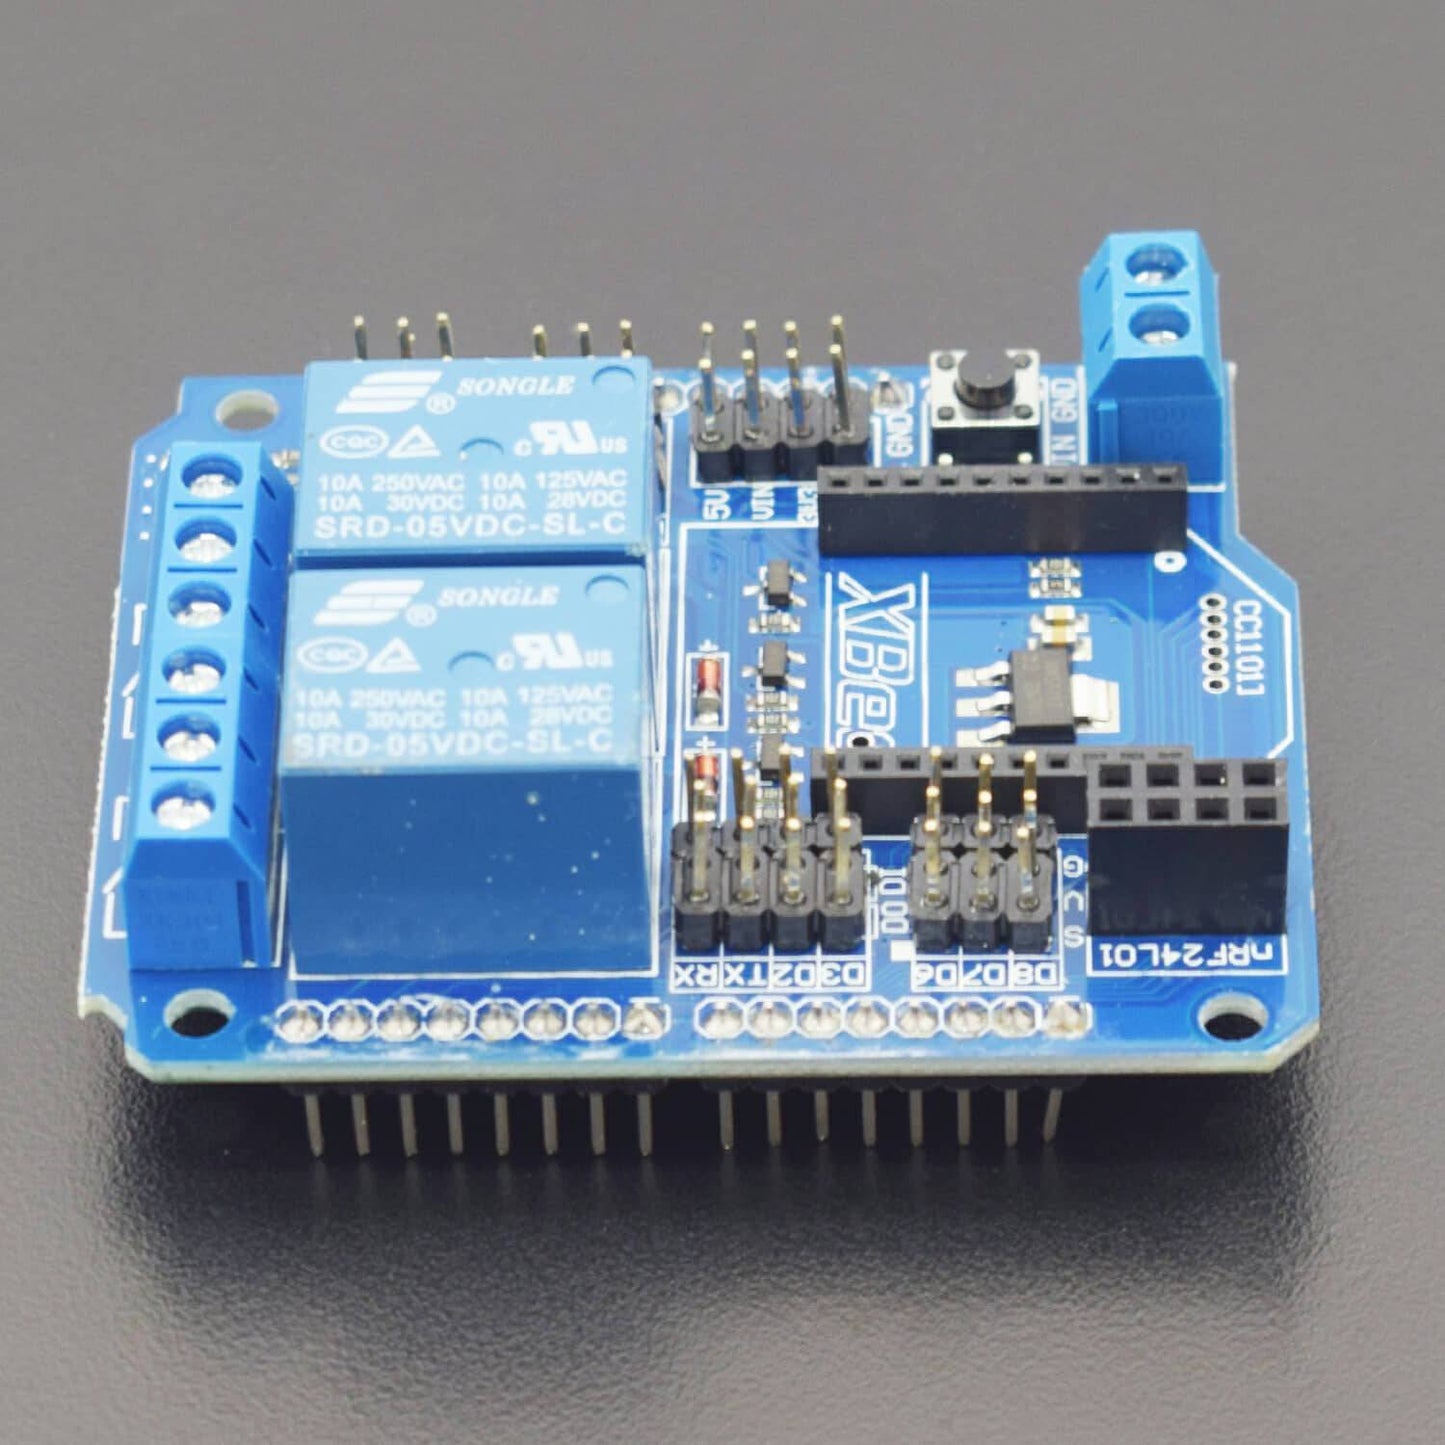 2 Road Relay Shield Wireless Expansion Board (with XBee/BTBee Interface) - RS1779 - REES52